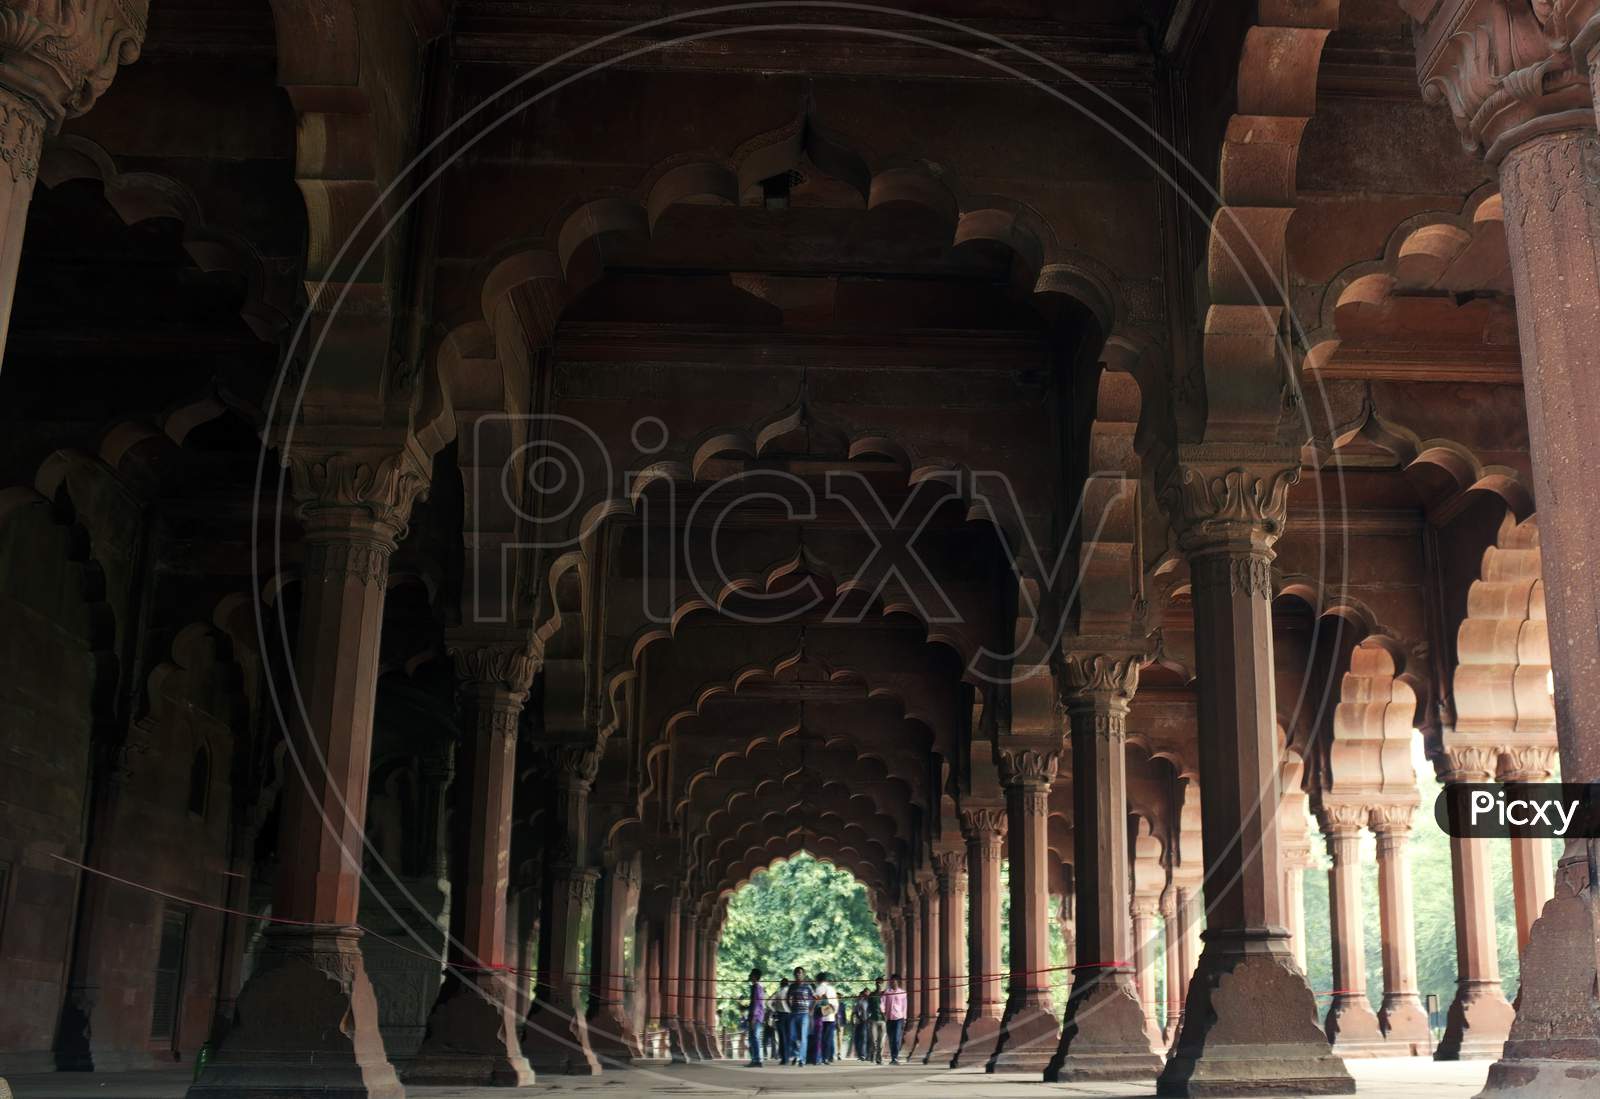 Indian Architecture In Red Fort, Delhi, India